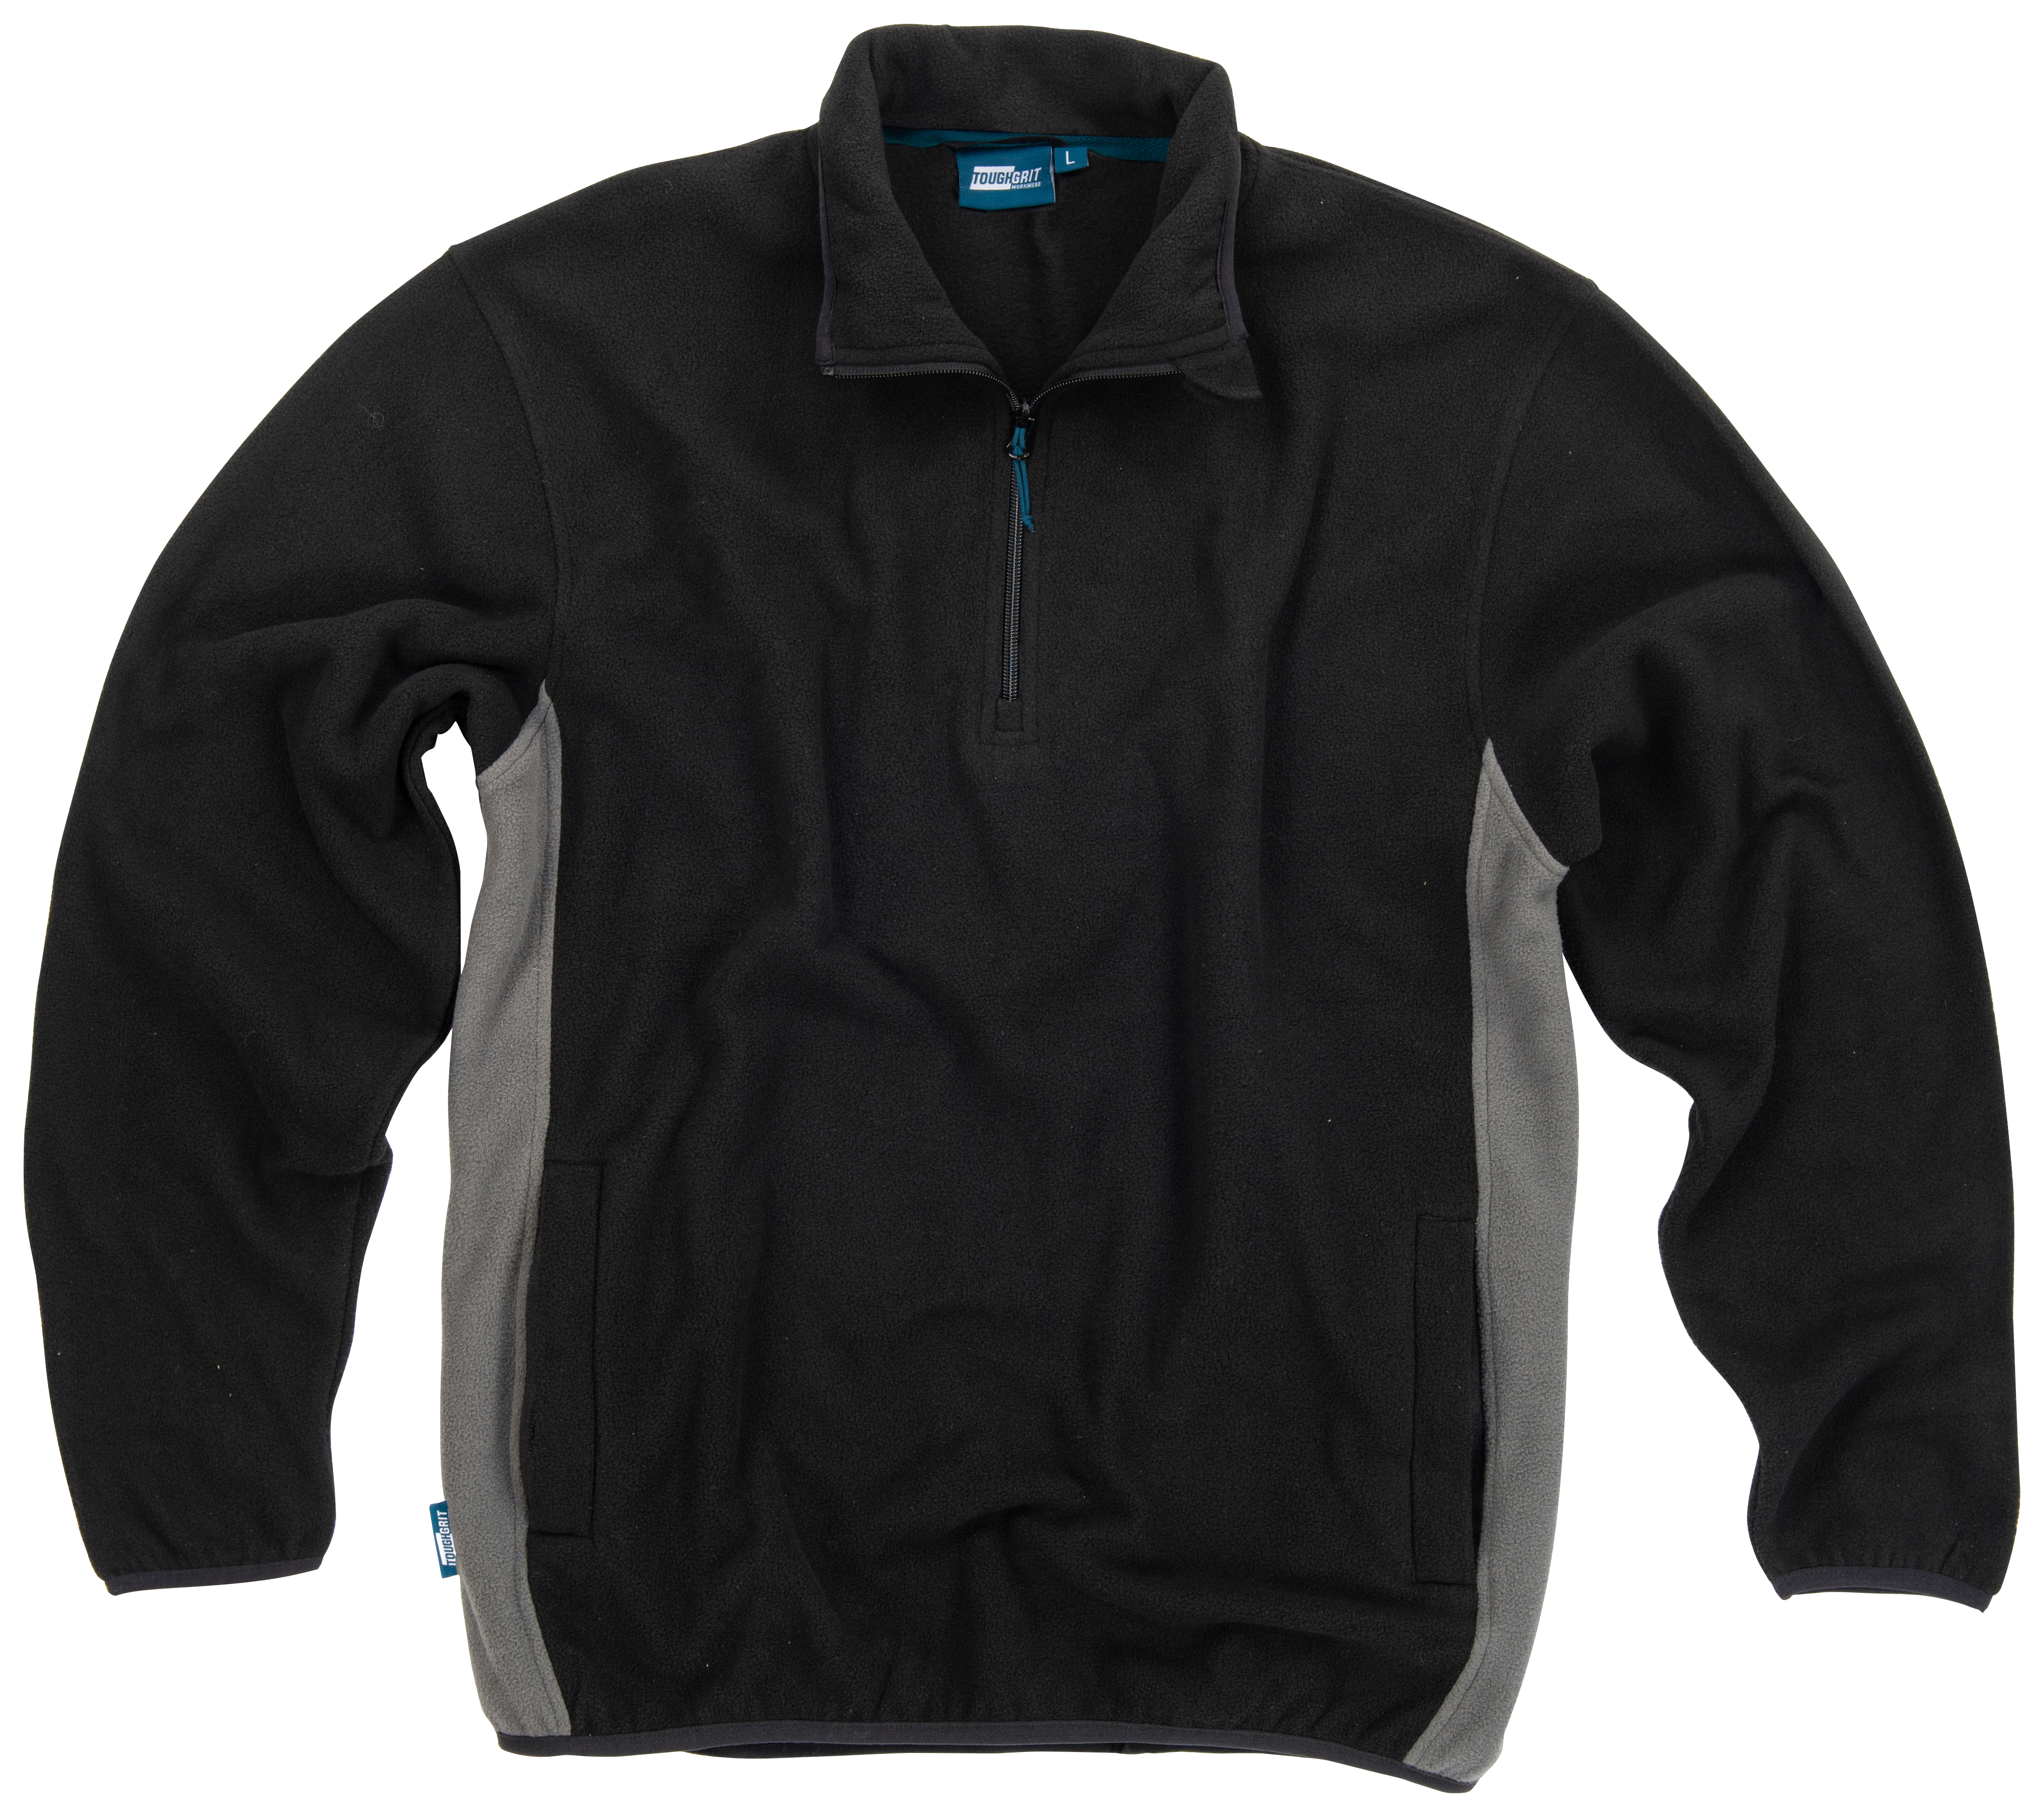 Image of Tough Grit 1/4 Zip Fleece, in Black and Grey Quick-Drying, Size: XL